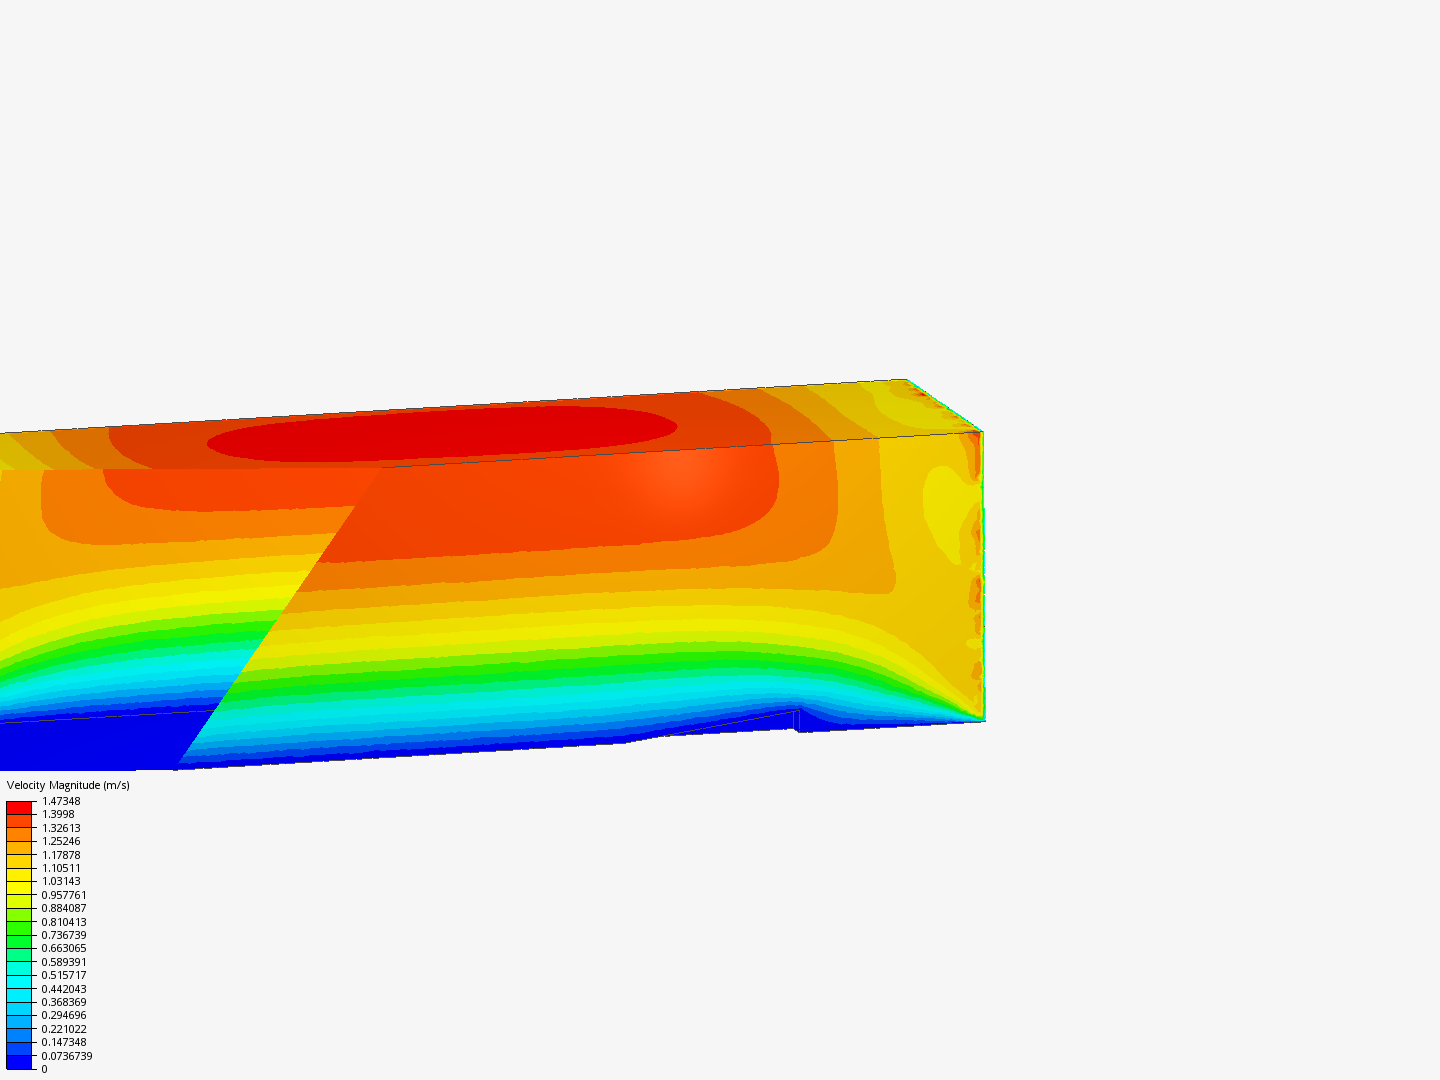 Wedge 1 CFD External Flow Case Study image